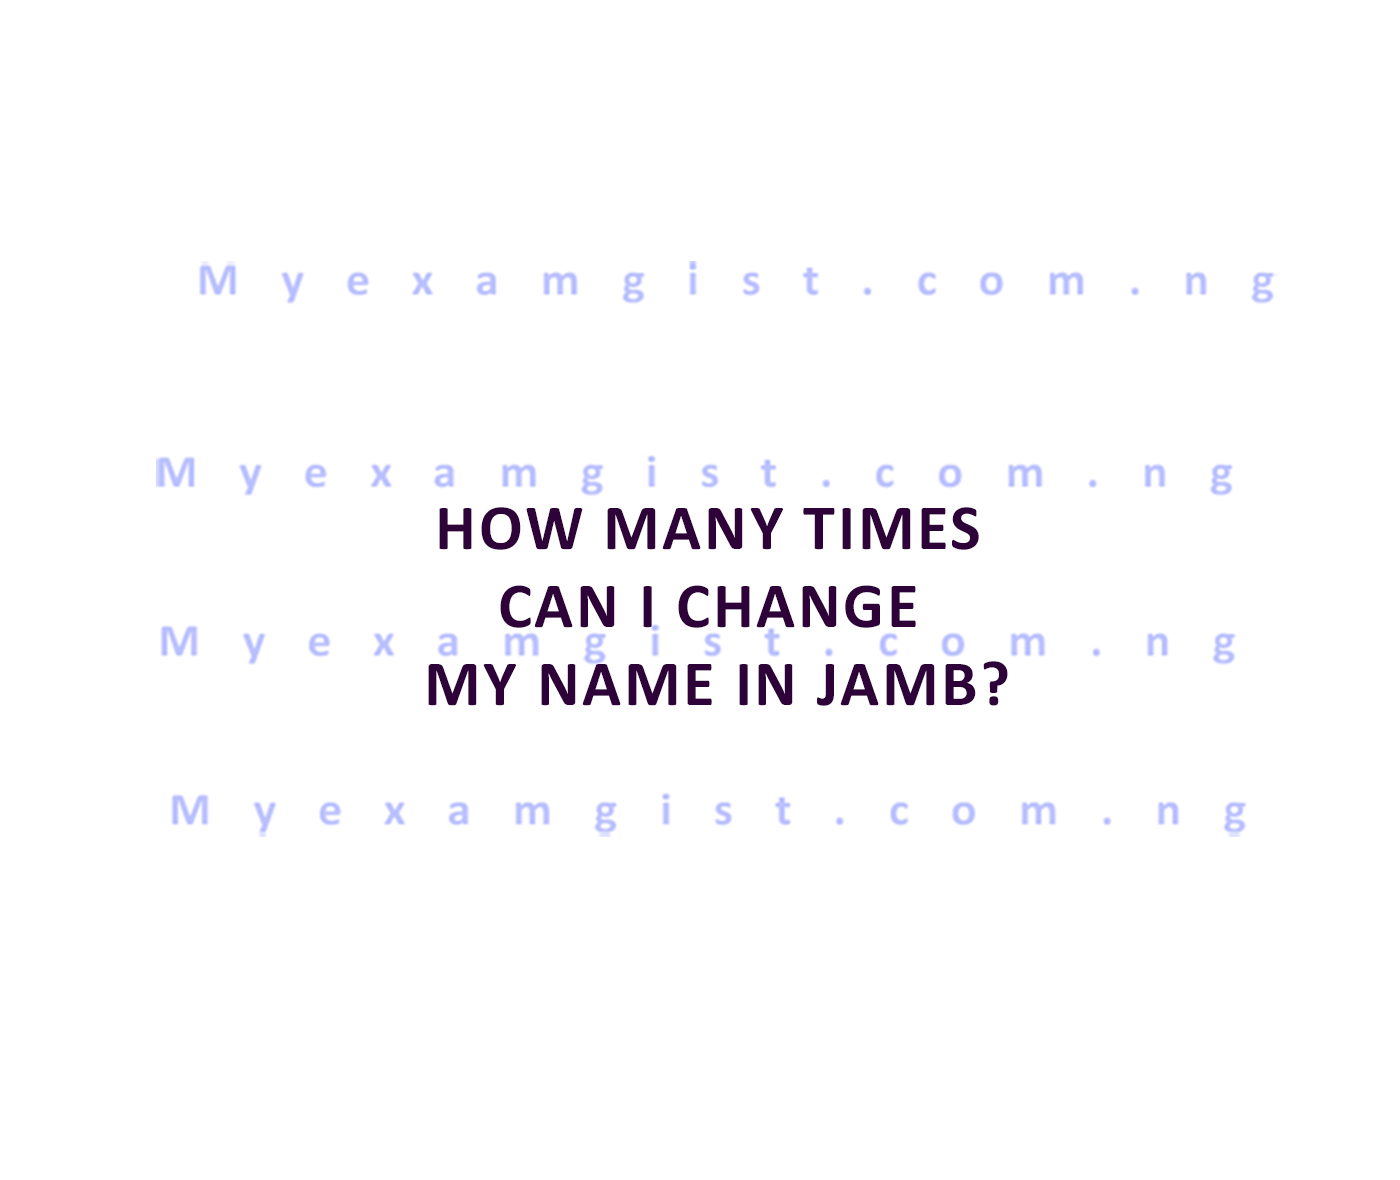 How many times can I change my name in JAMB?